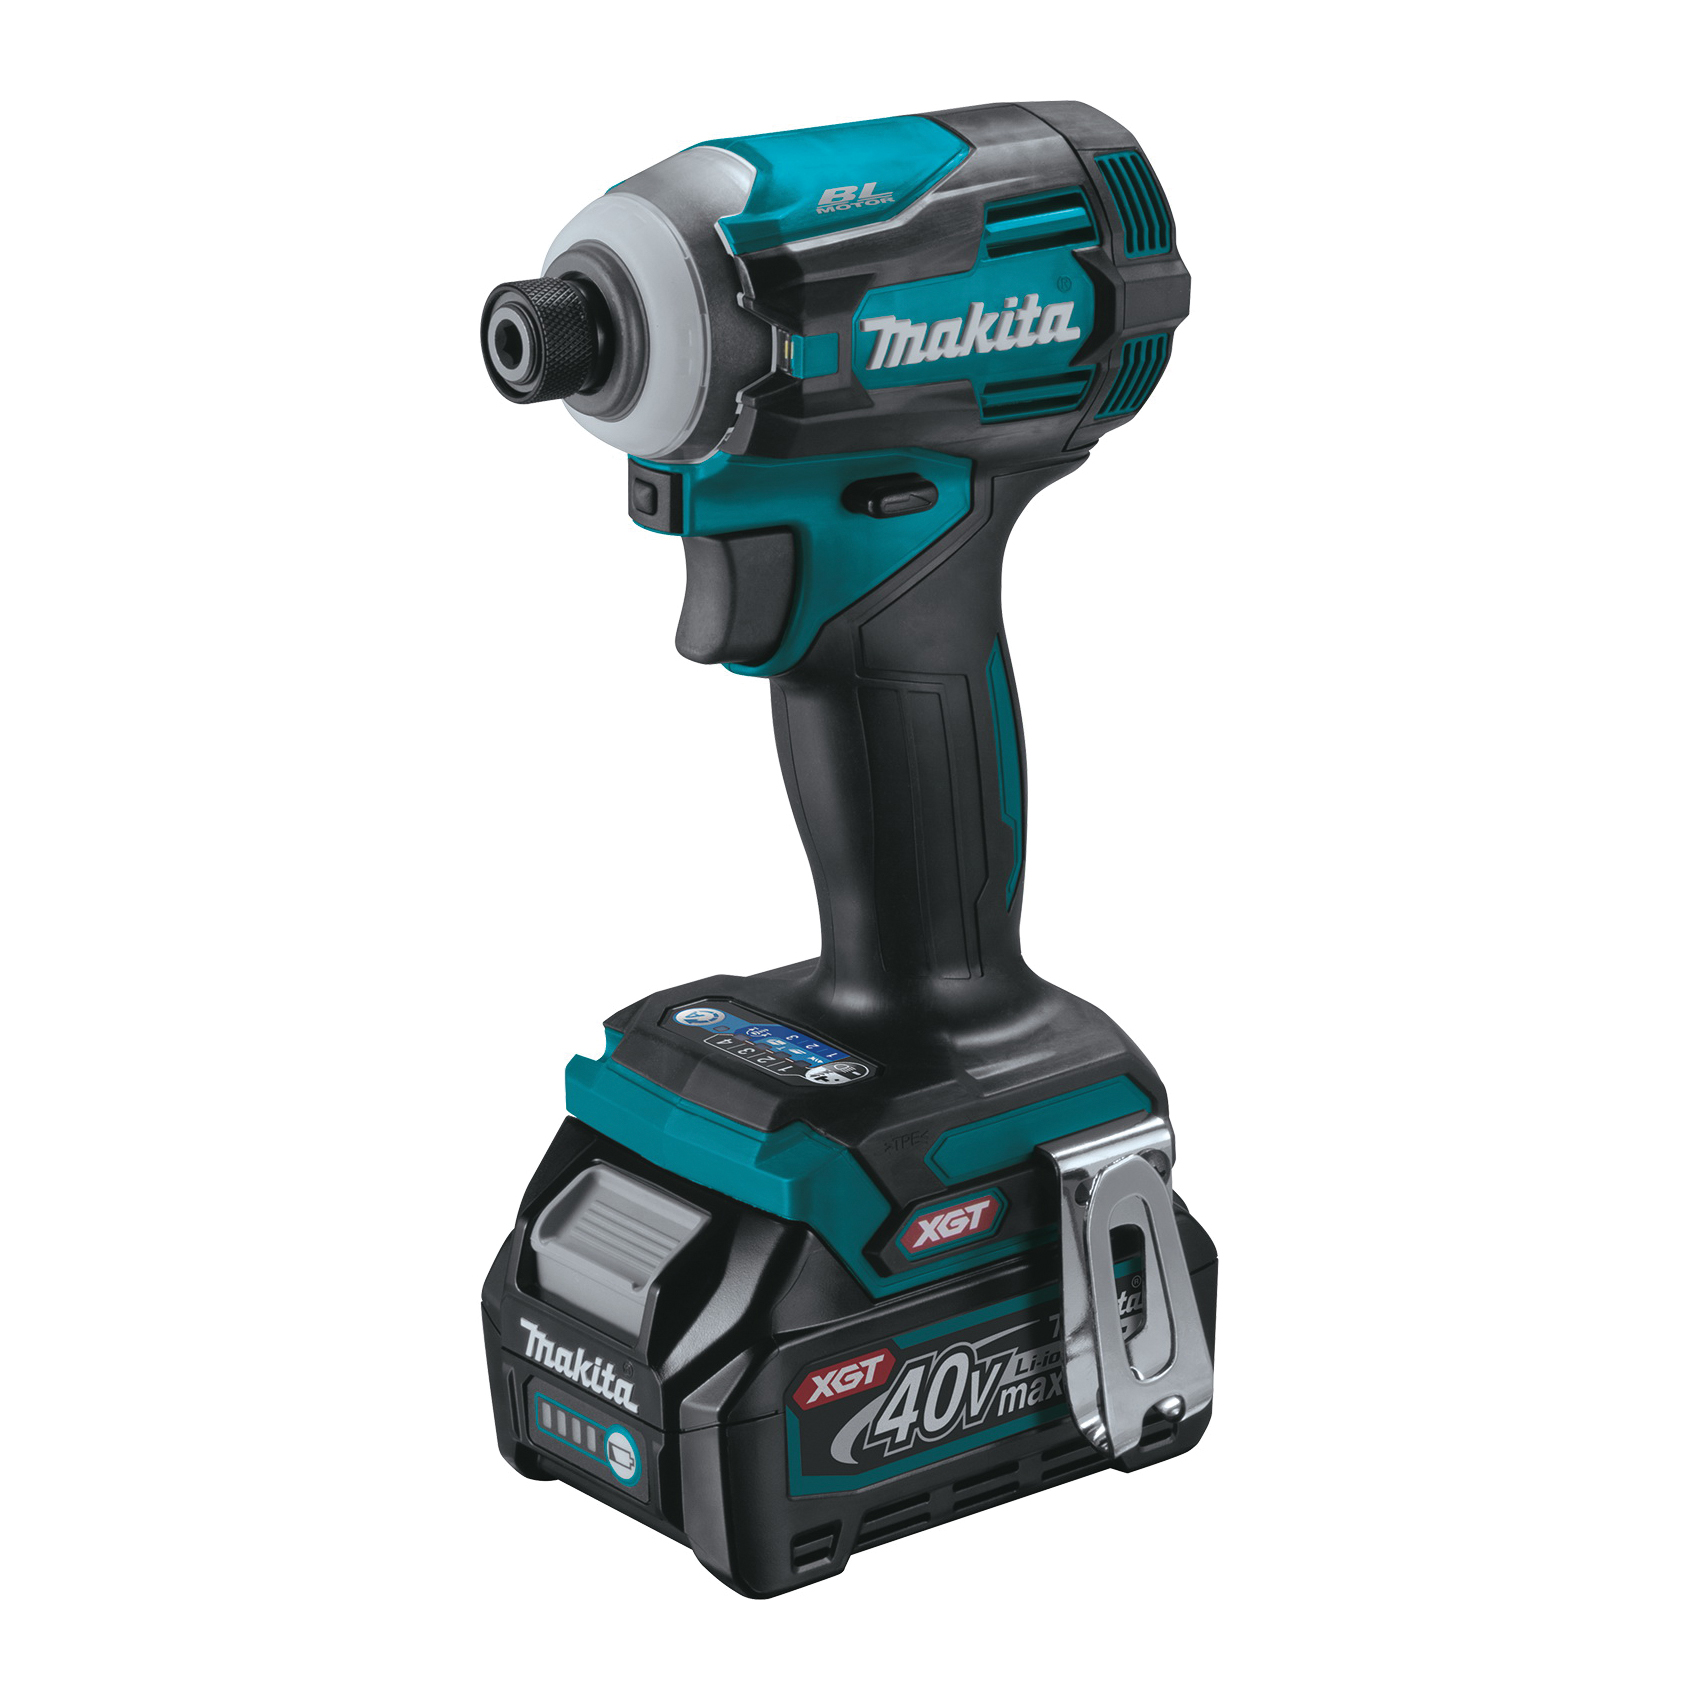 Makita XGT GDT01D Impact Driver Kit, Battery Included, 40 V, 2.5 Ah, 1/4 in Drive, Hex Drive - 4